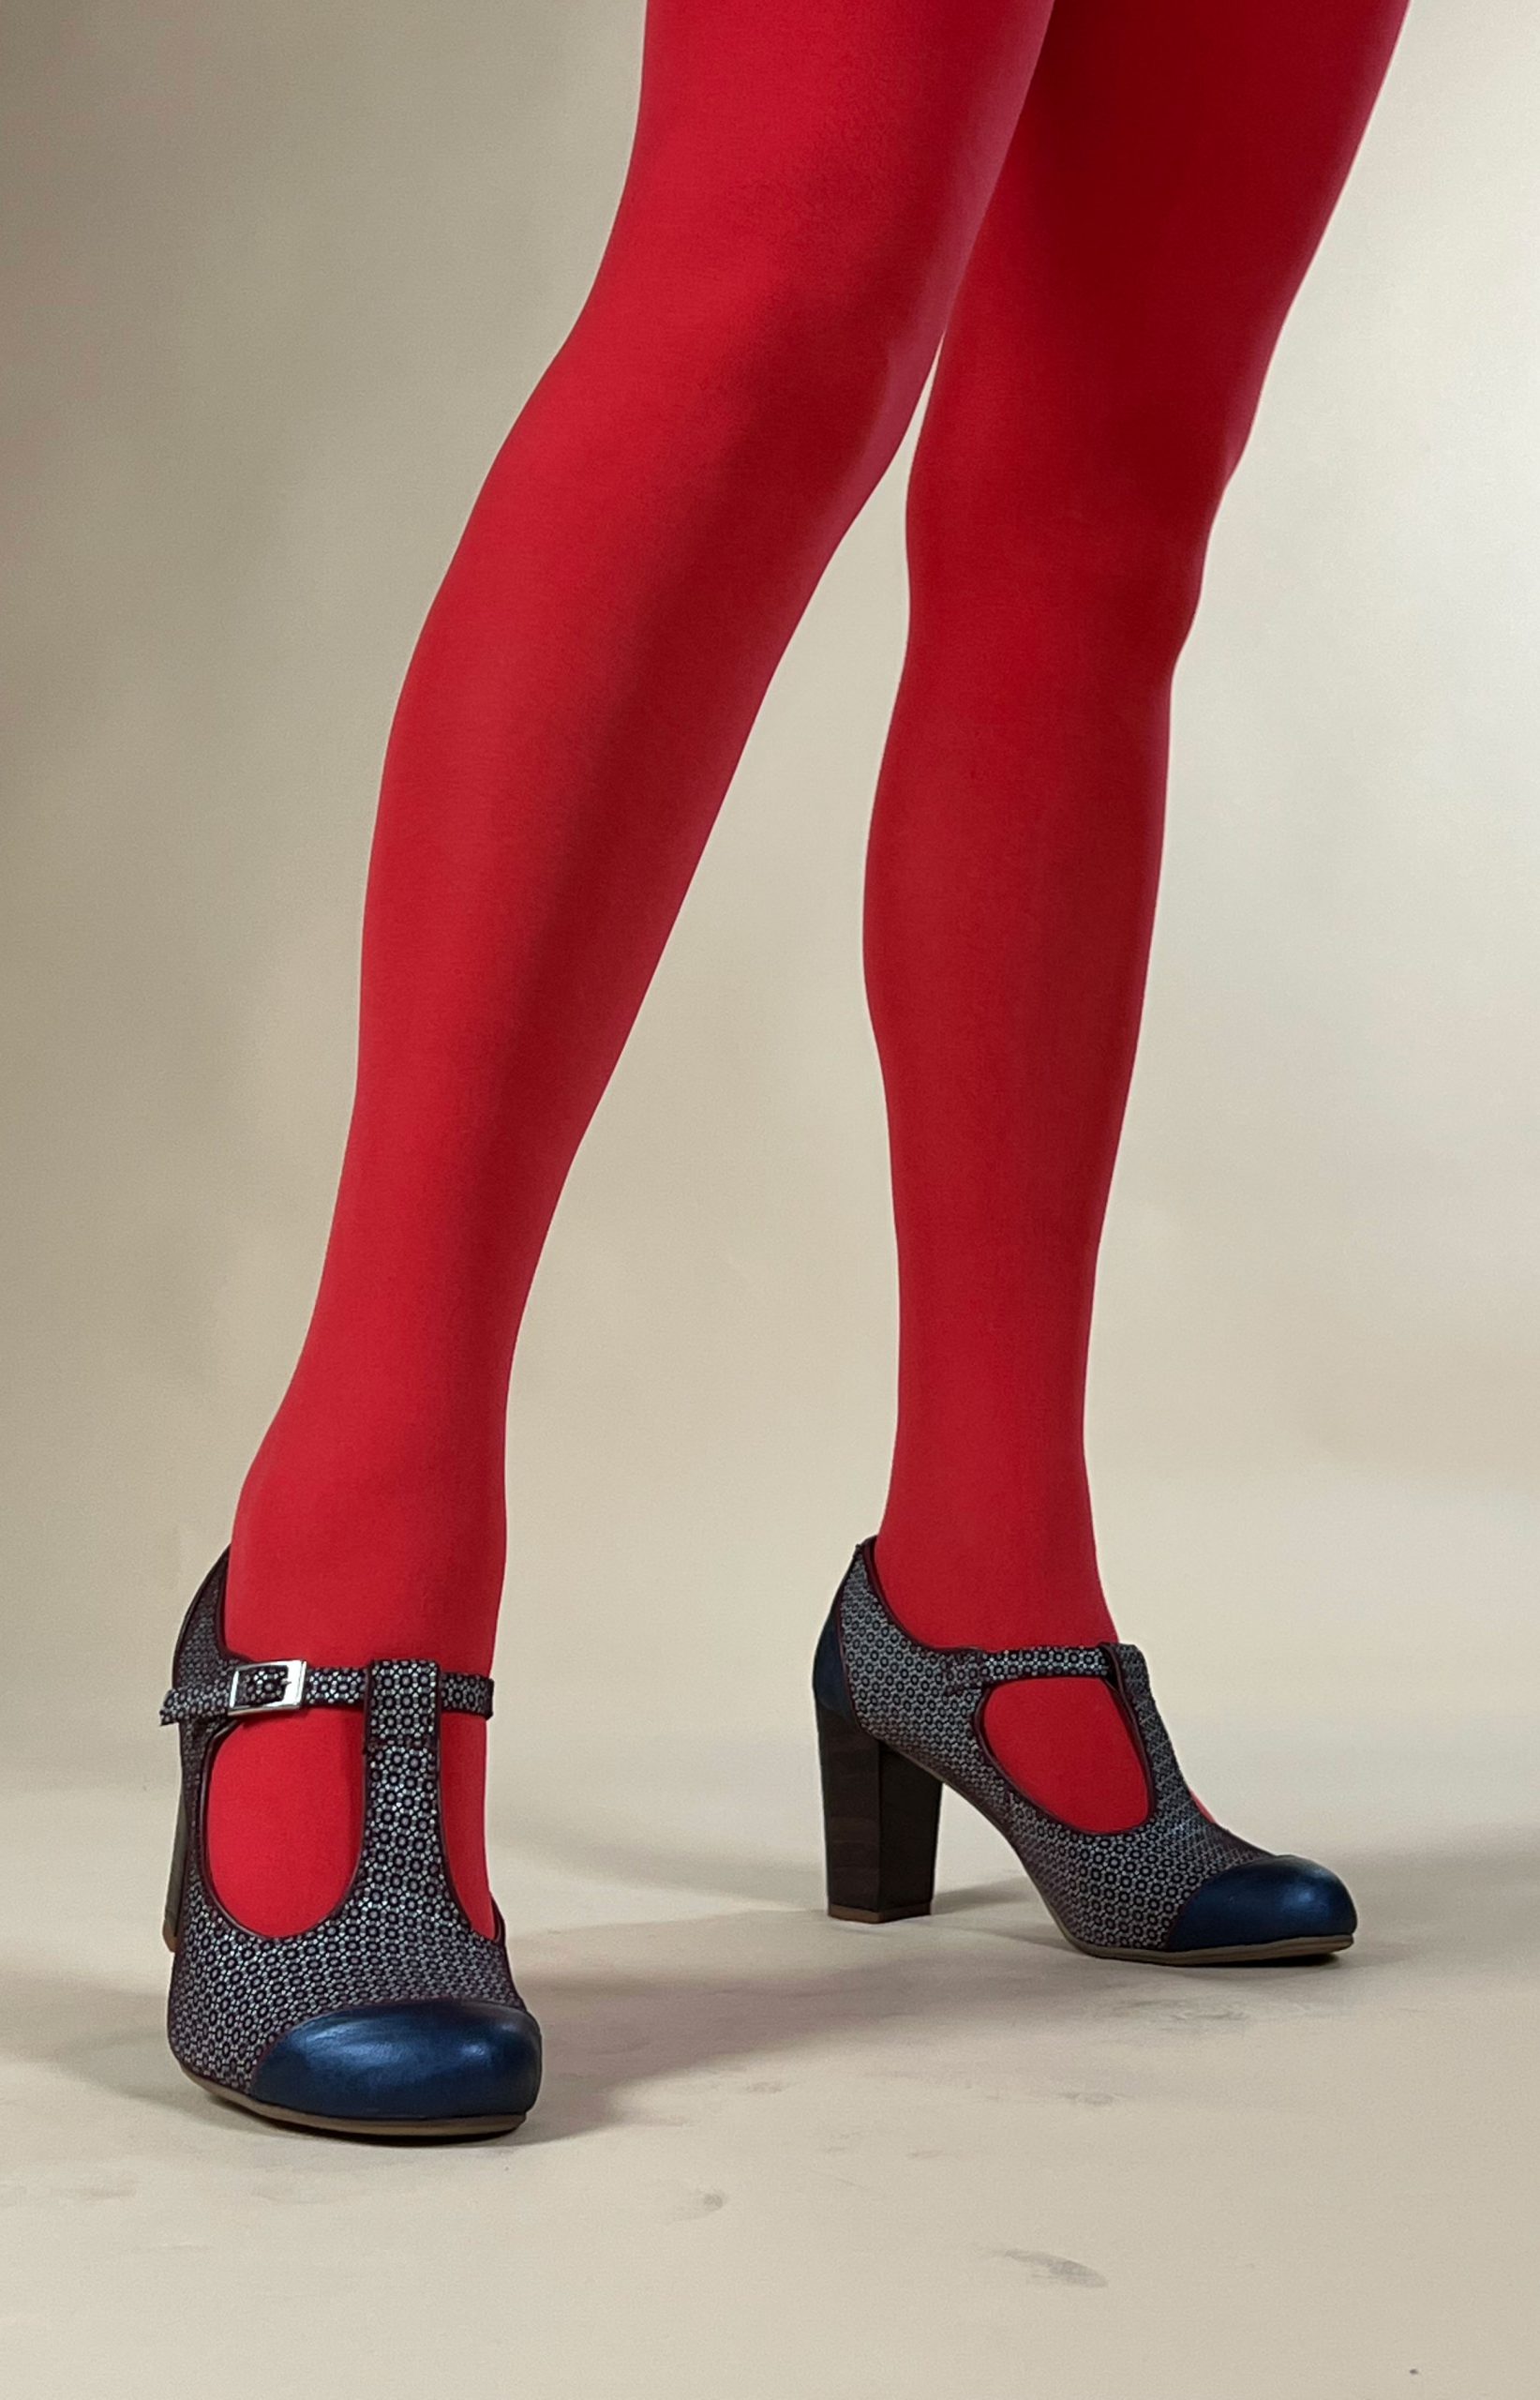 https://www.modshoes.co.uk/wp-content/uploads/2022/04/mod-shoes-ladies-tights-80-denier-opaque-tights-high-risk-red-tights-04-scaled.jpg